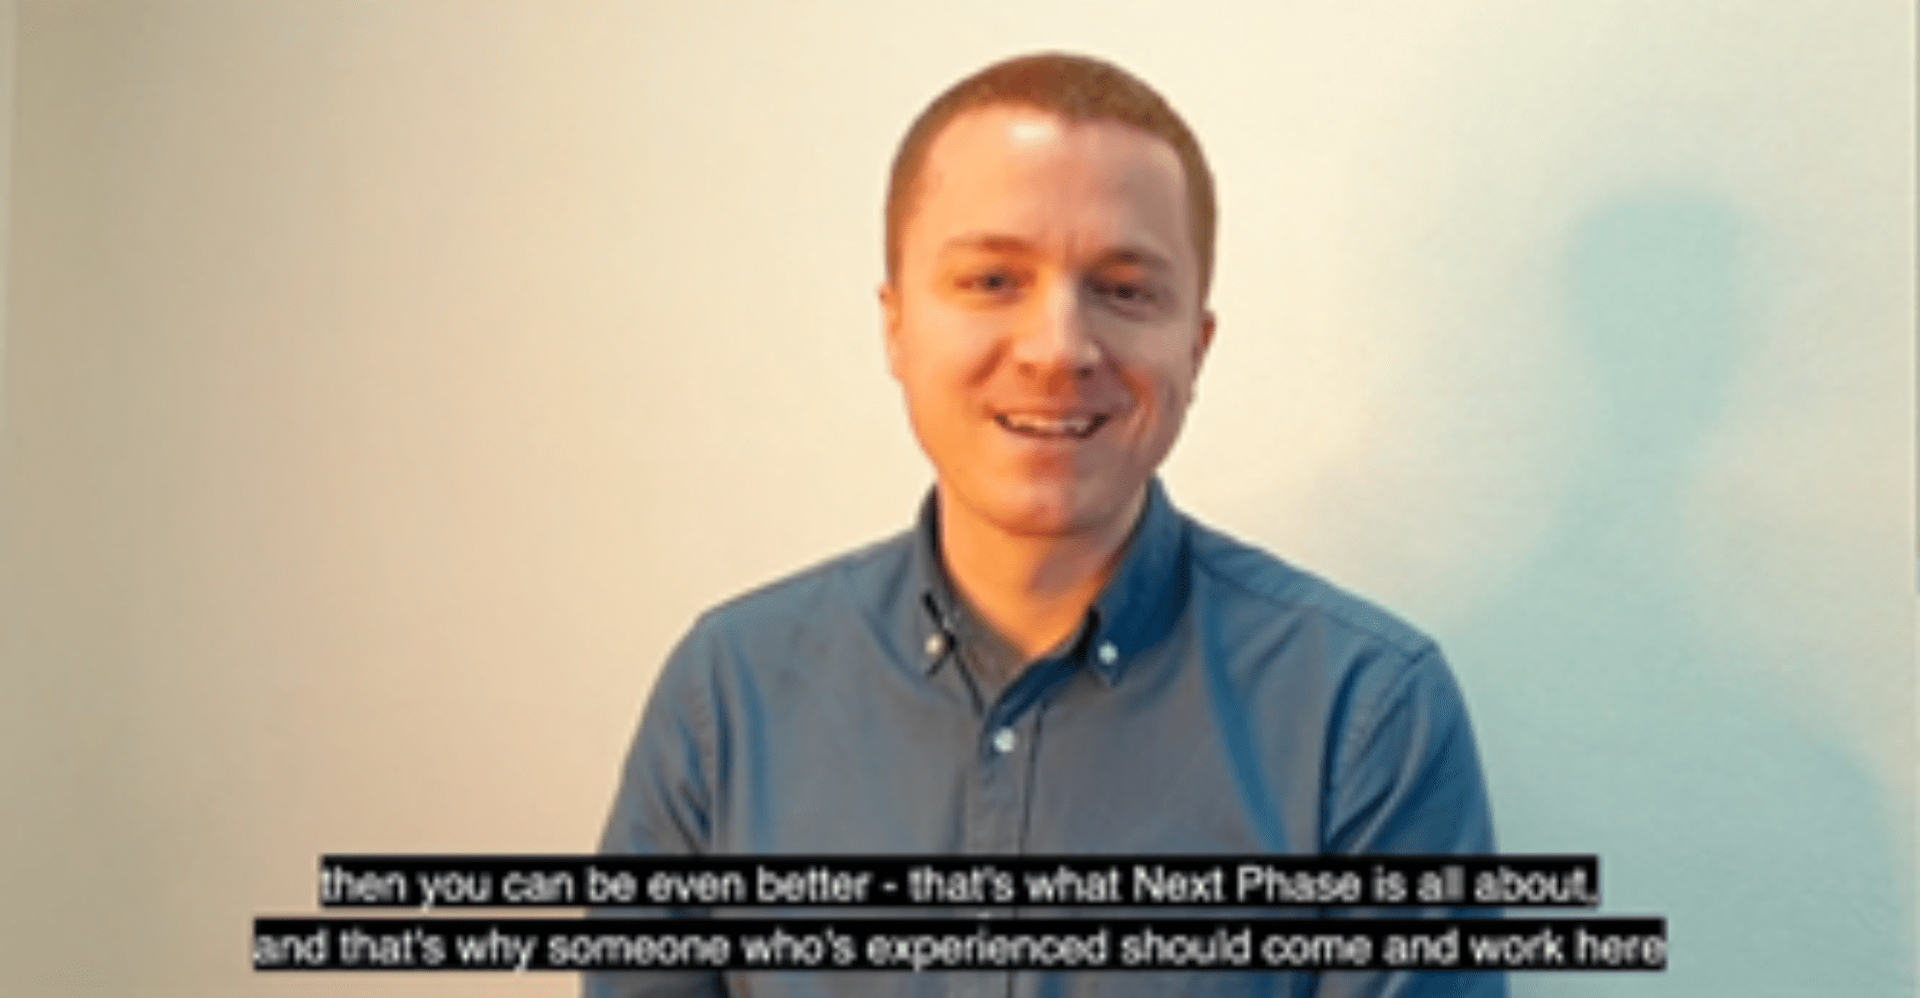 Jake Thomas, director at Next Phase, talks about the reasons why an experienced recruiter should come and join Next Phase as we expand our business internationally